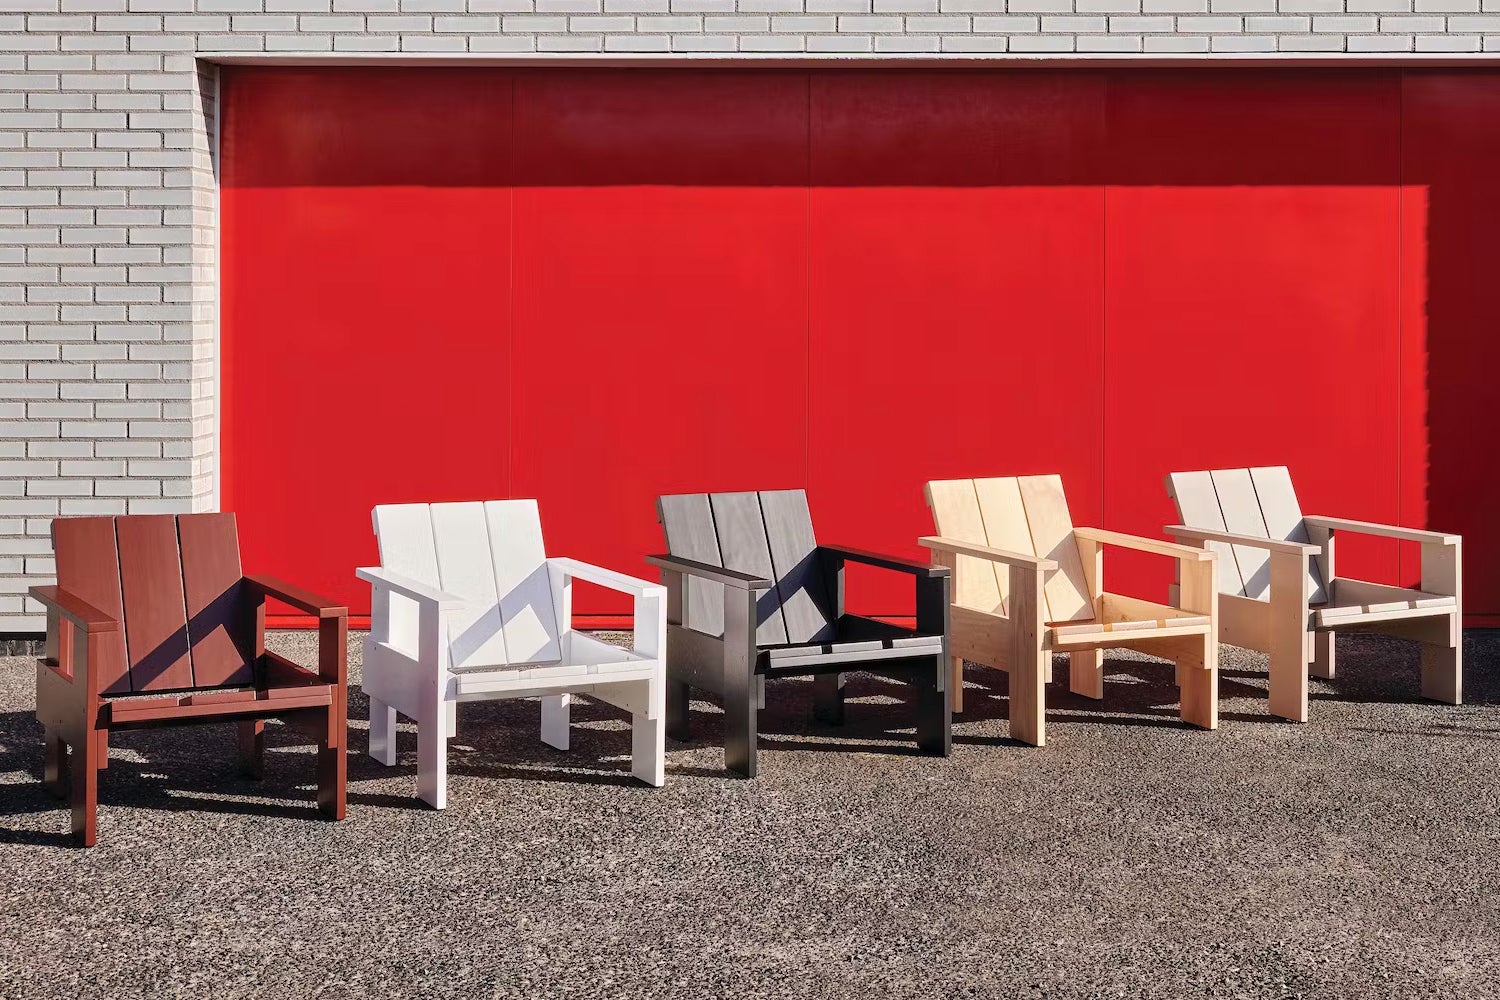 all crate chairs in different colorways outside of red and brick building